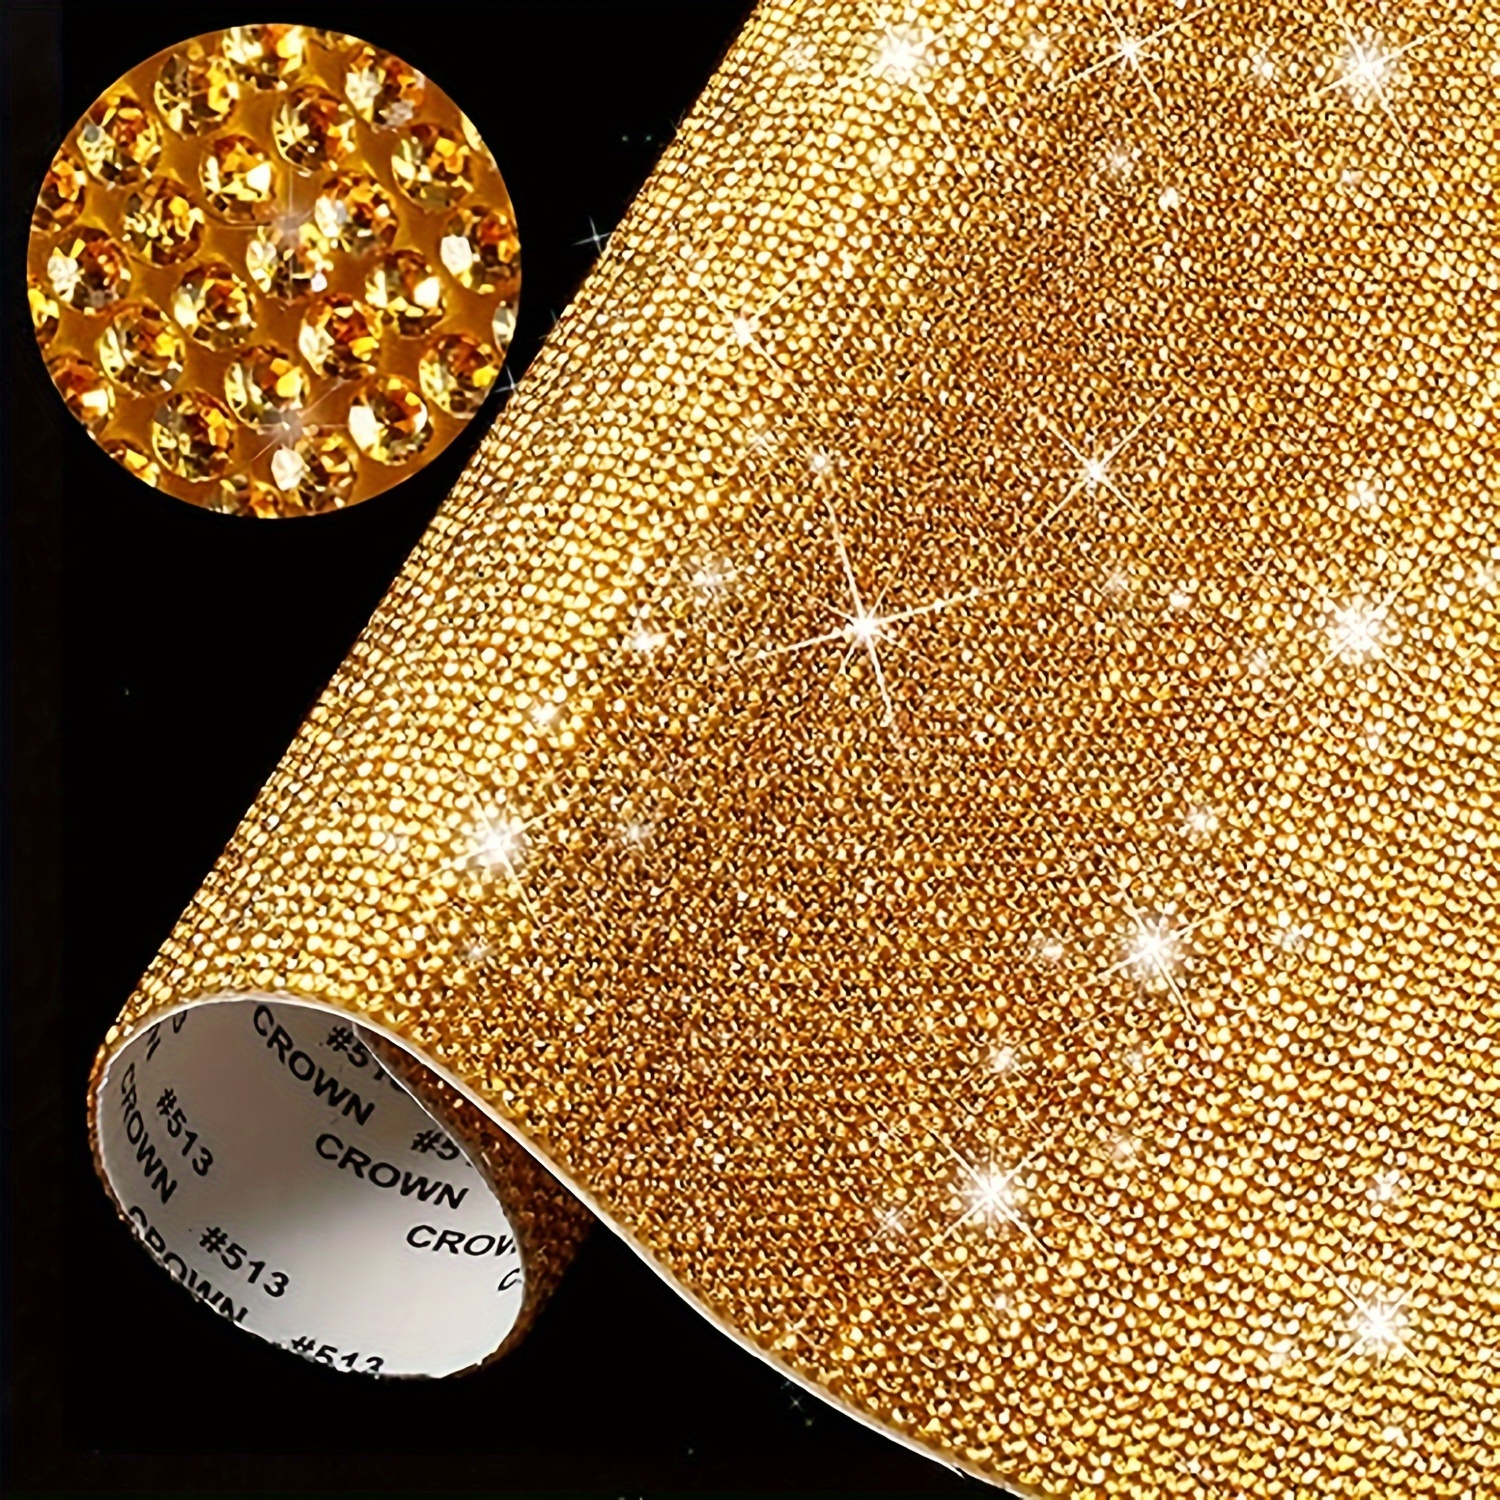  Taipoilbow 12000pcs Leopard Print Rhinestone Stickers Bling  Diamond Sticker 2 mm Rhinestone Sheets Self Adhesive Crystal Stickers for  Arts Crafts Gift Car Decoration Gem Stickers(9.4 Inch x 7.9 Inch)A